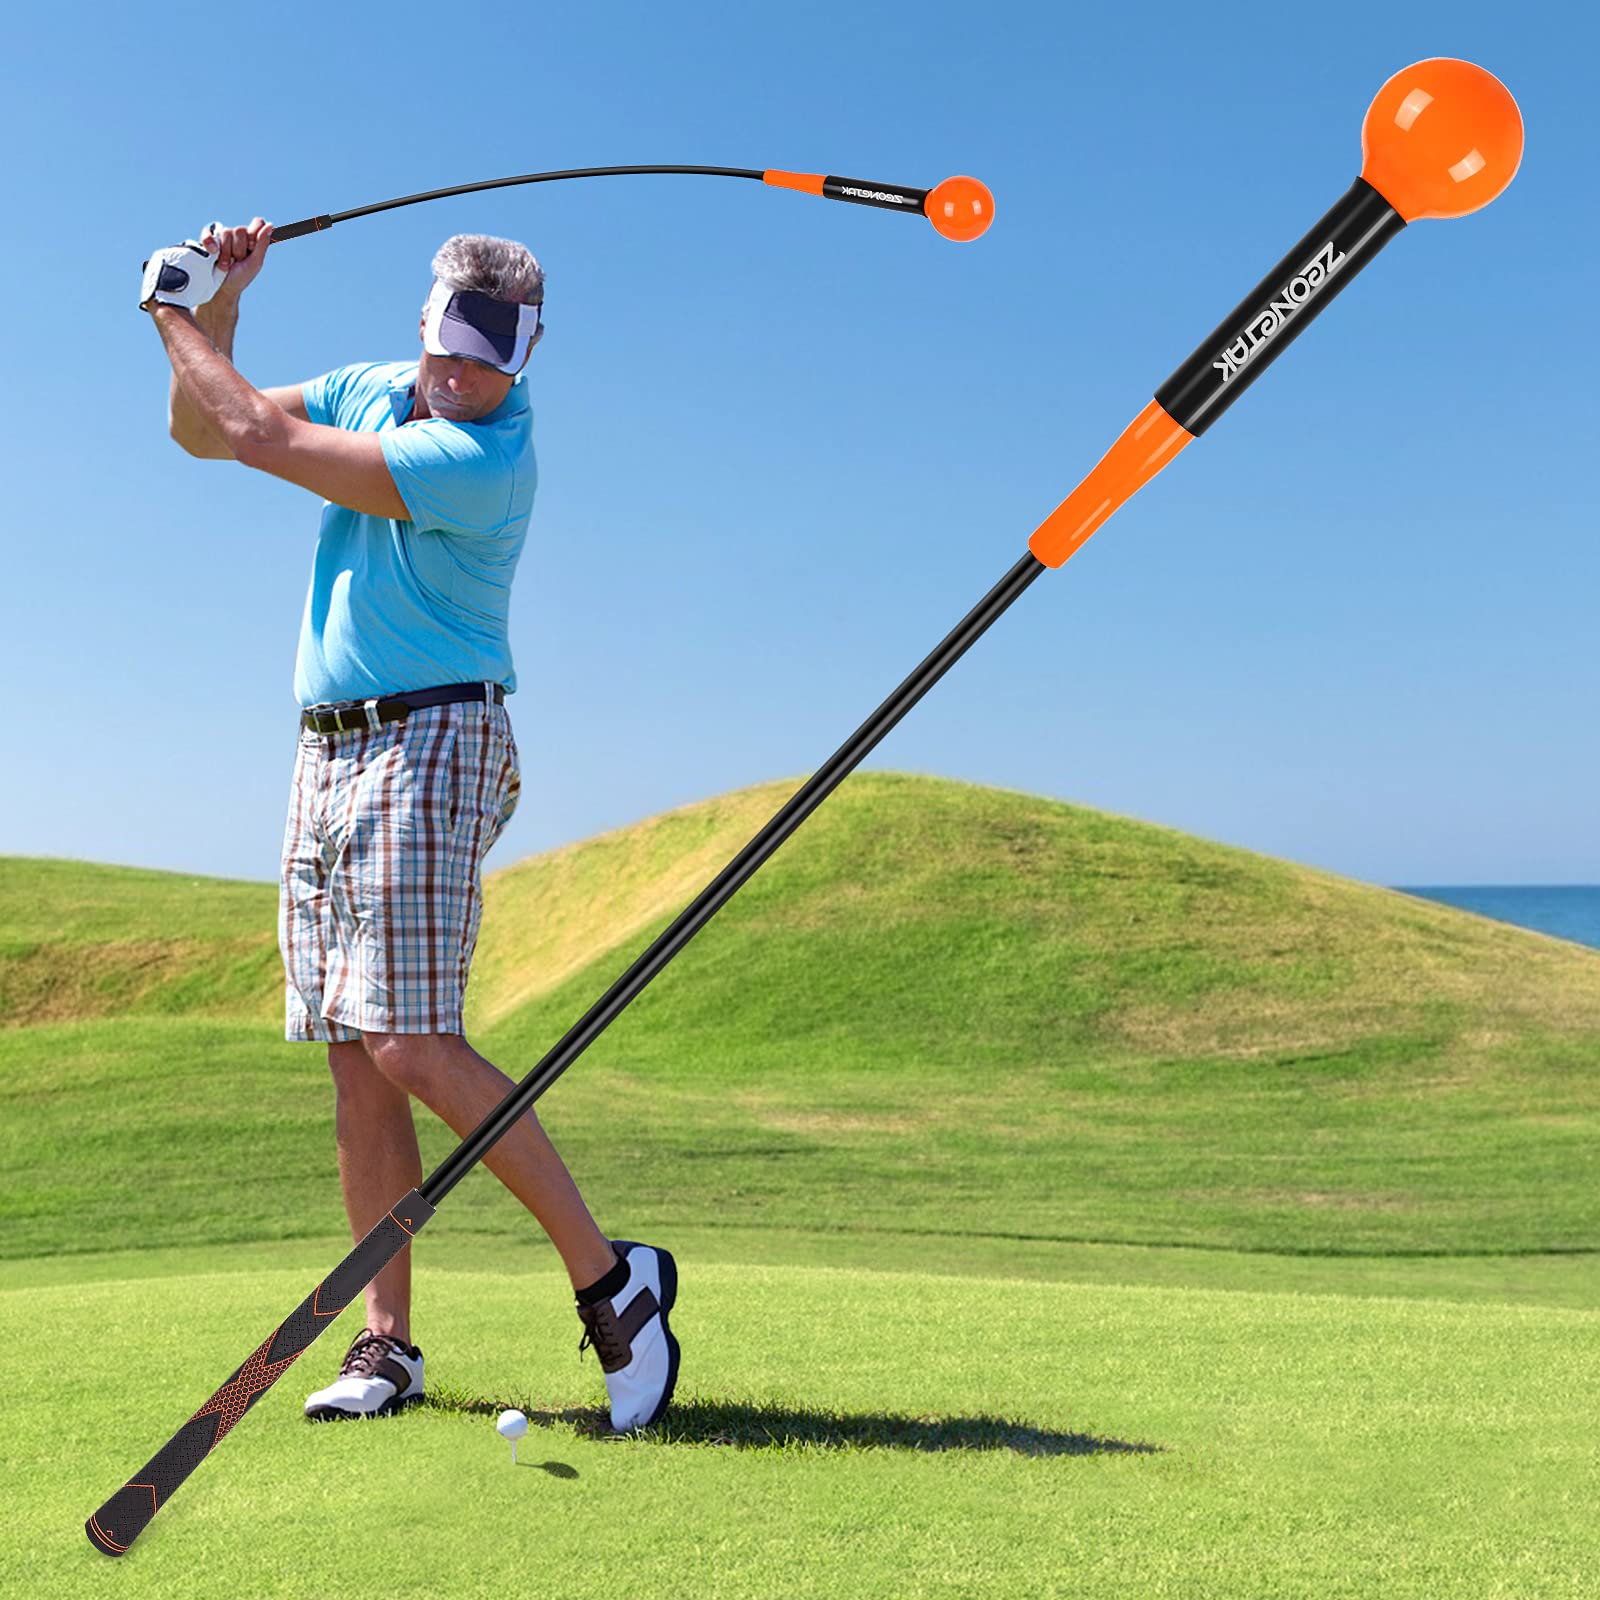 Zeonetak Golf Swing Trainer Aid - Golf Swing Training, Practice Warm-Up Stick for Strength,Rhythm, Flexibility, Tempo, and Balance Suit for Indoor & Outdoor